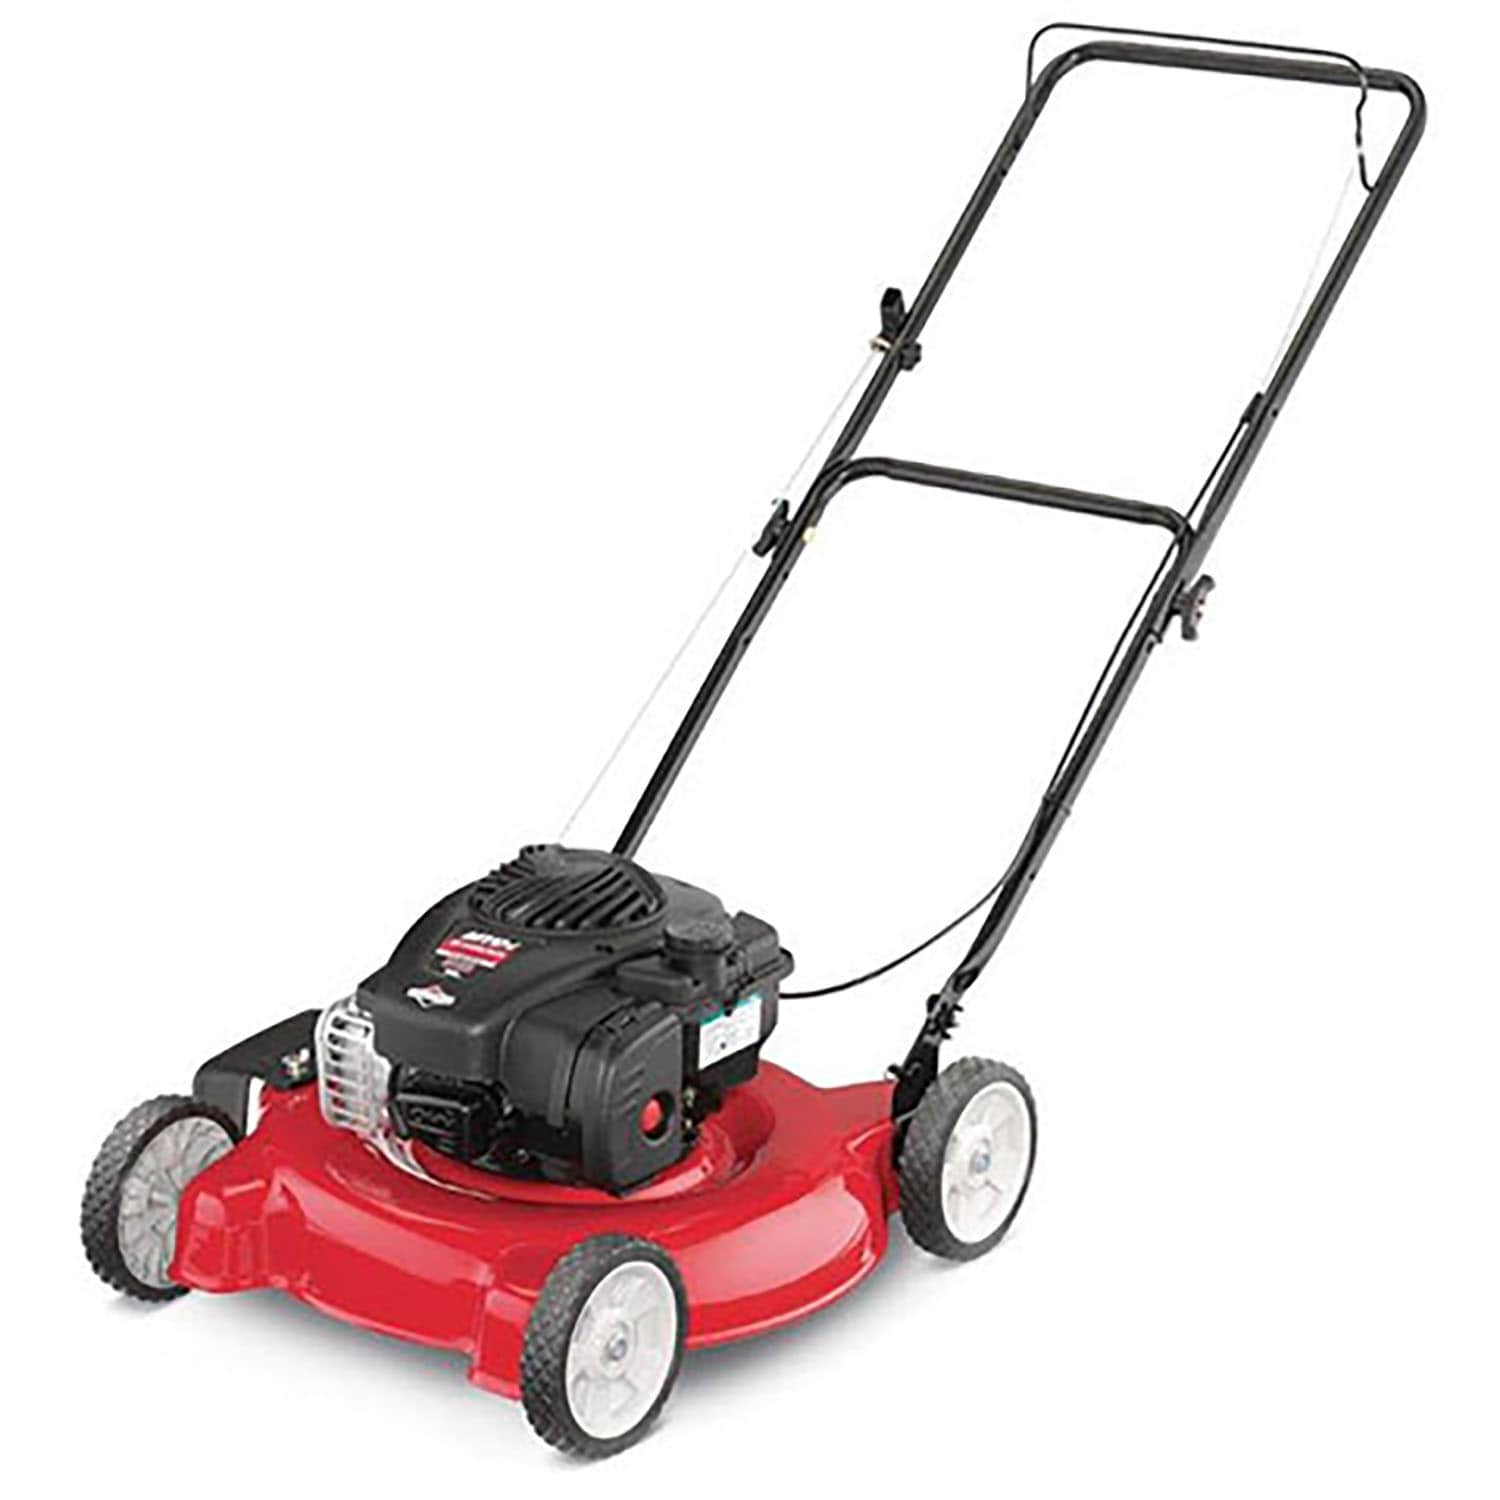 Yard Machines 125-cc 20-in Gas Push Lawn Mower with Briggs and